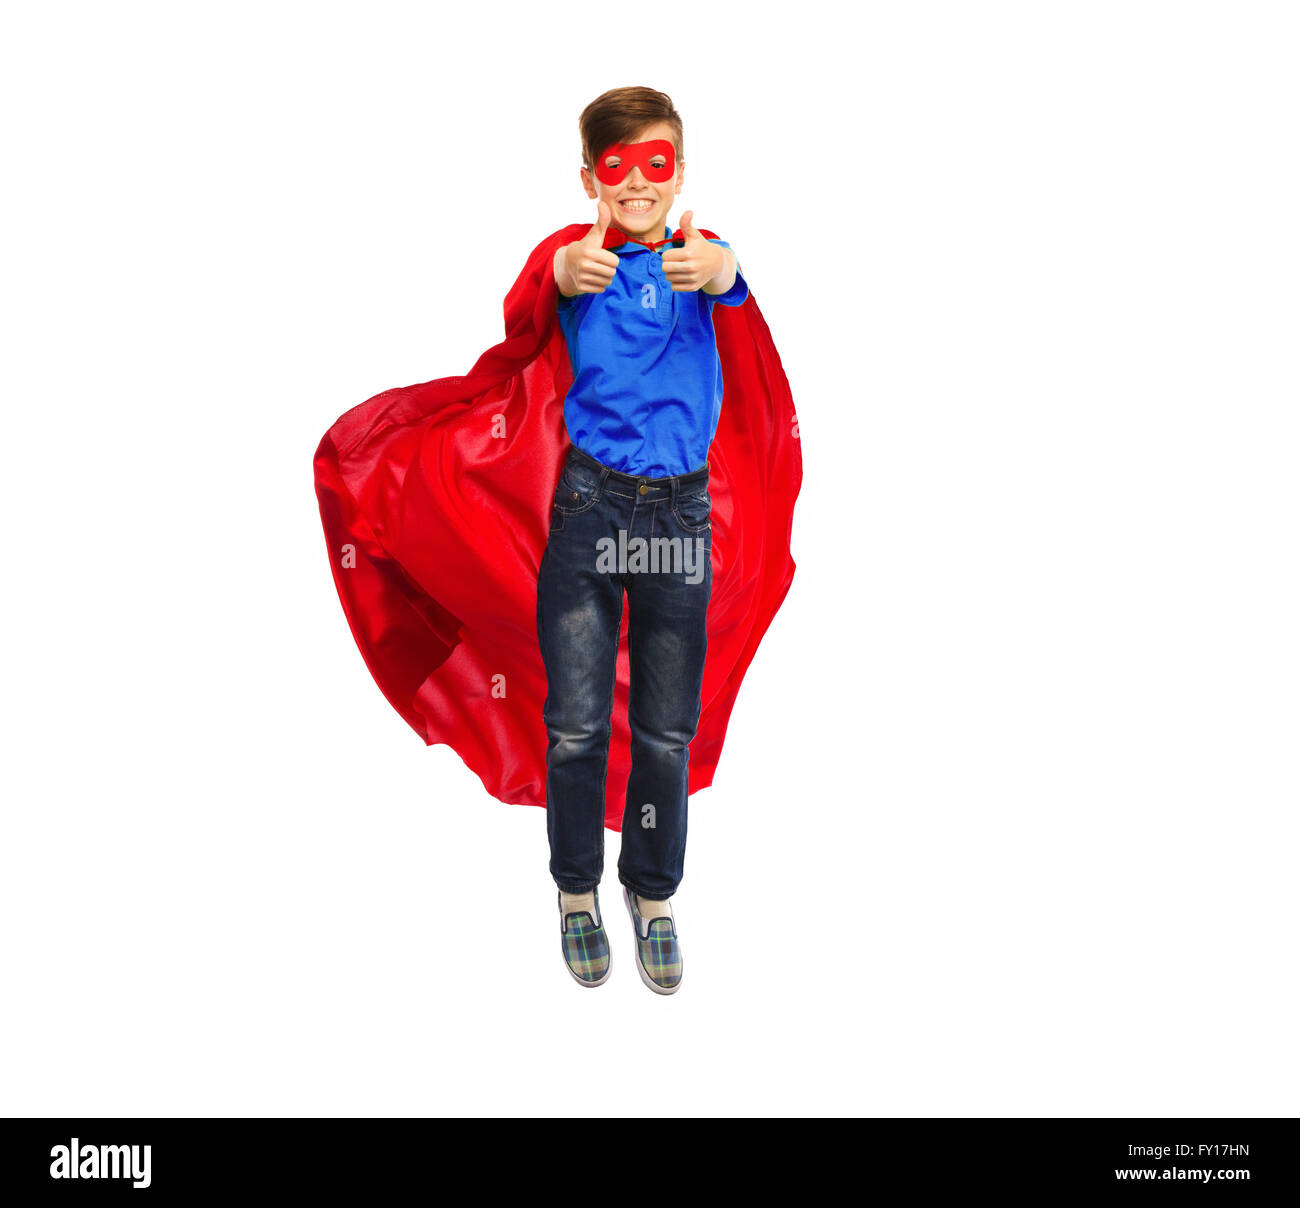 boy in super hero cape and mask showing thumbs up Stock Photo